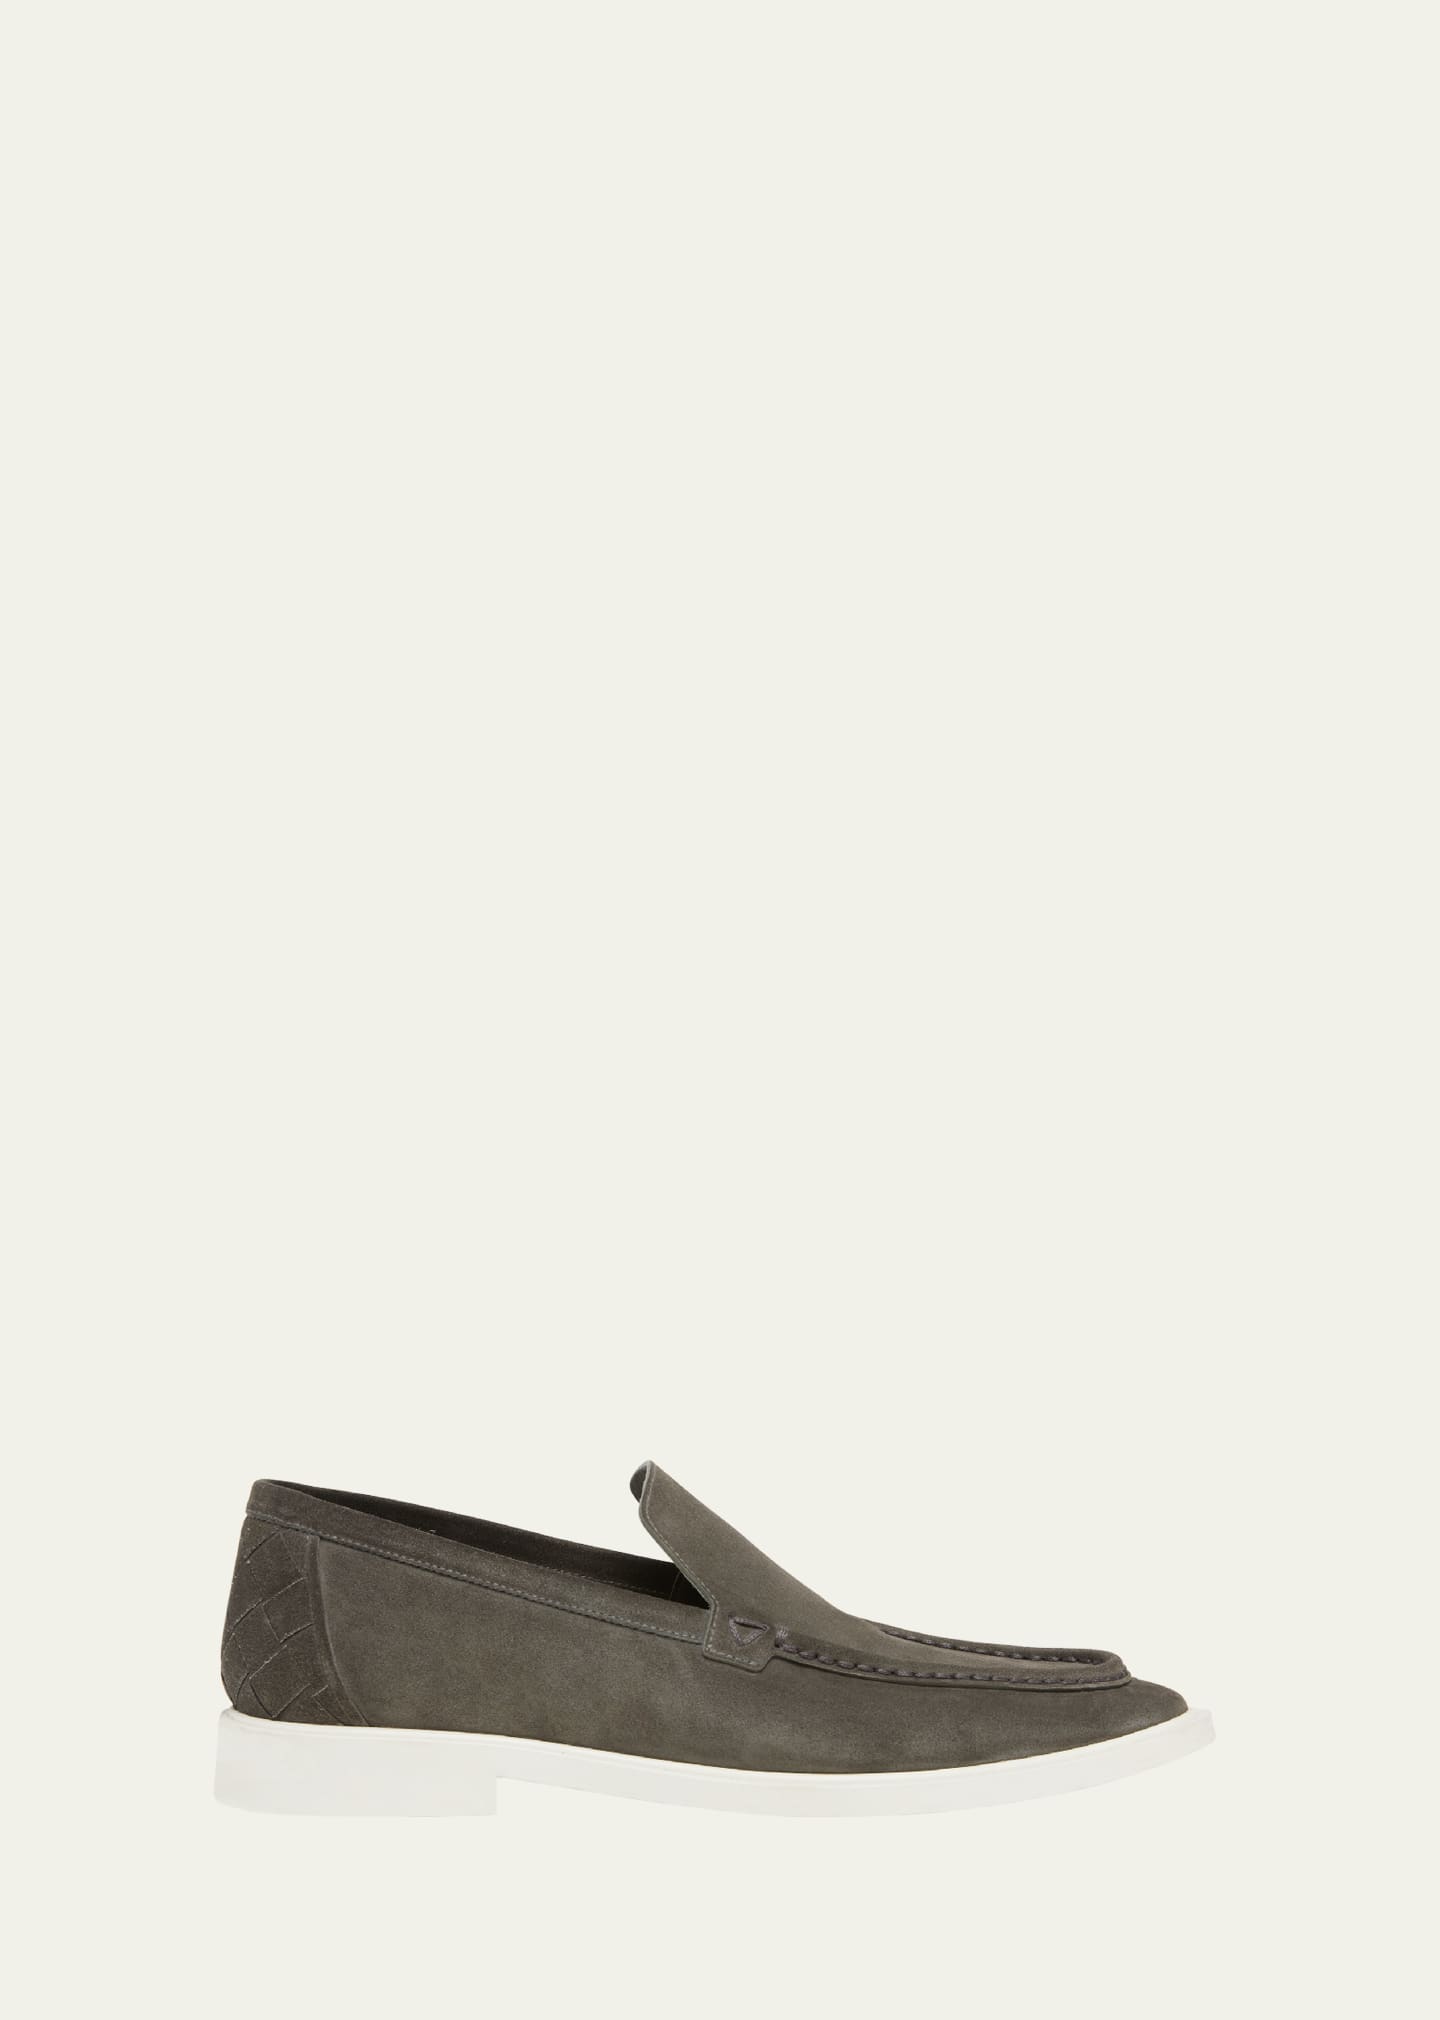 Men's Astair Suede Casual Slip-On Loafers